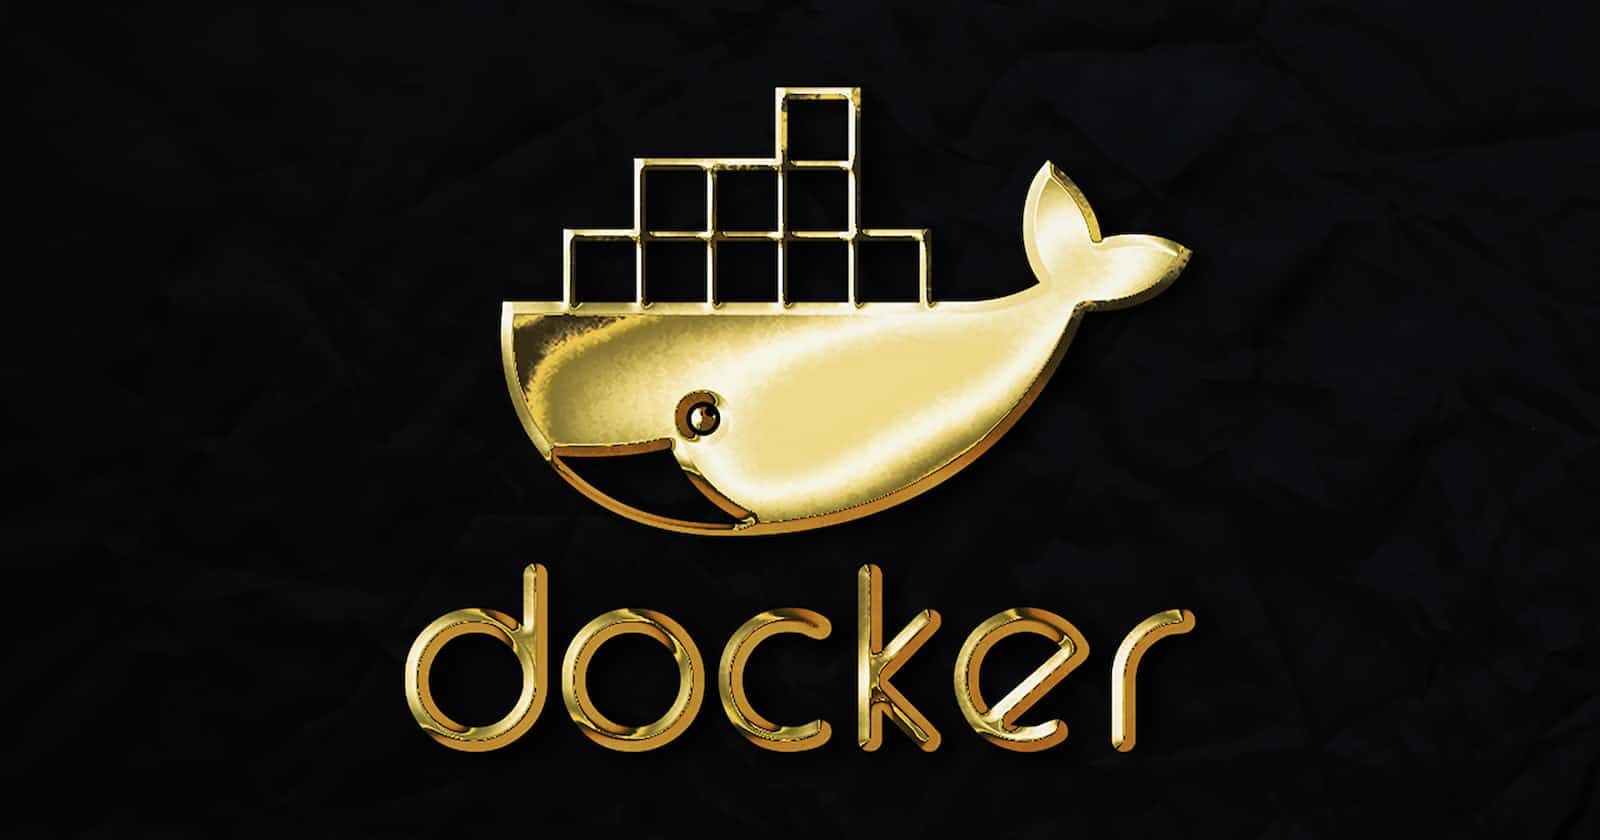 Generate compose file from docker container